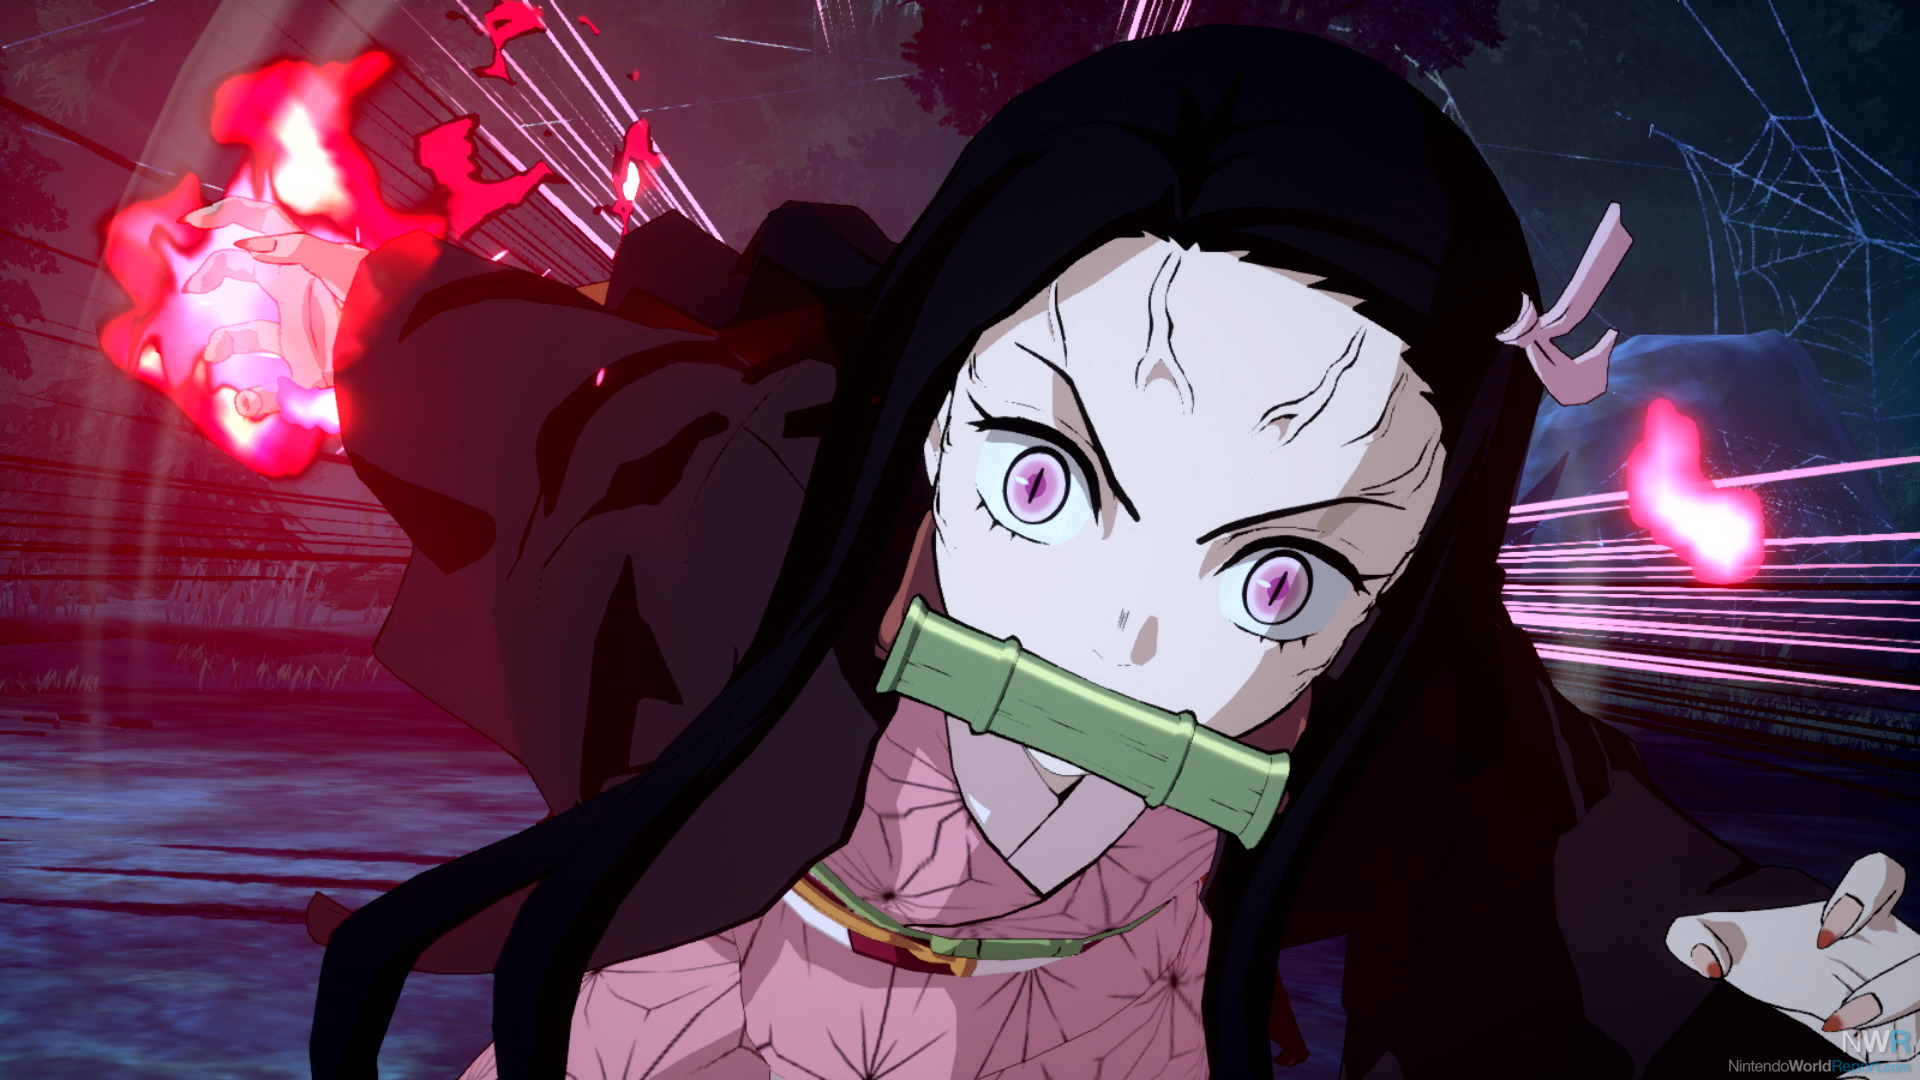 Demon Slayer created stages in Super Smash Bros. Ultimate let you fight in  front of Tanjiro and Nezuko